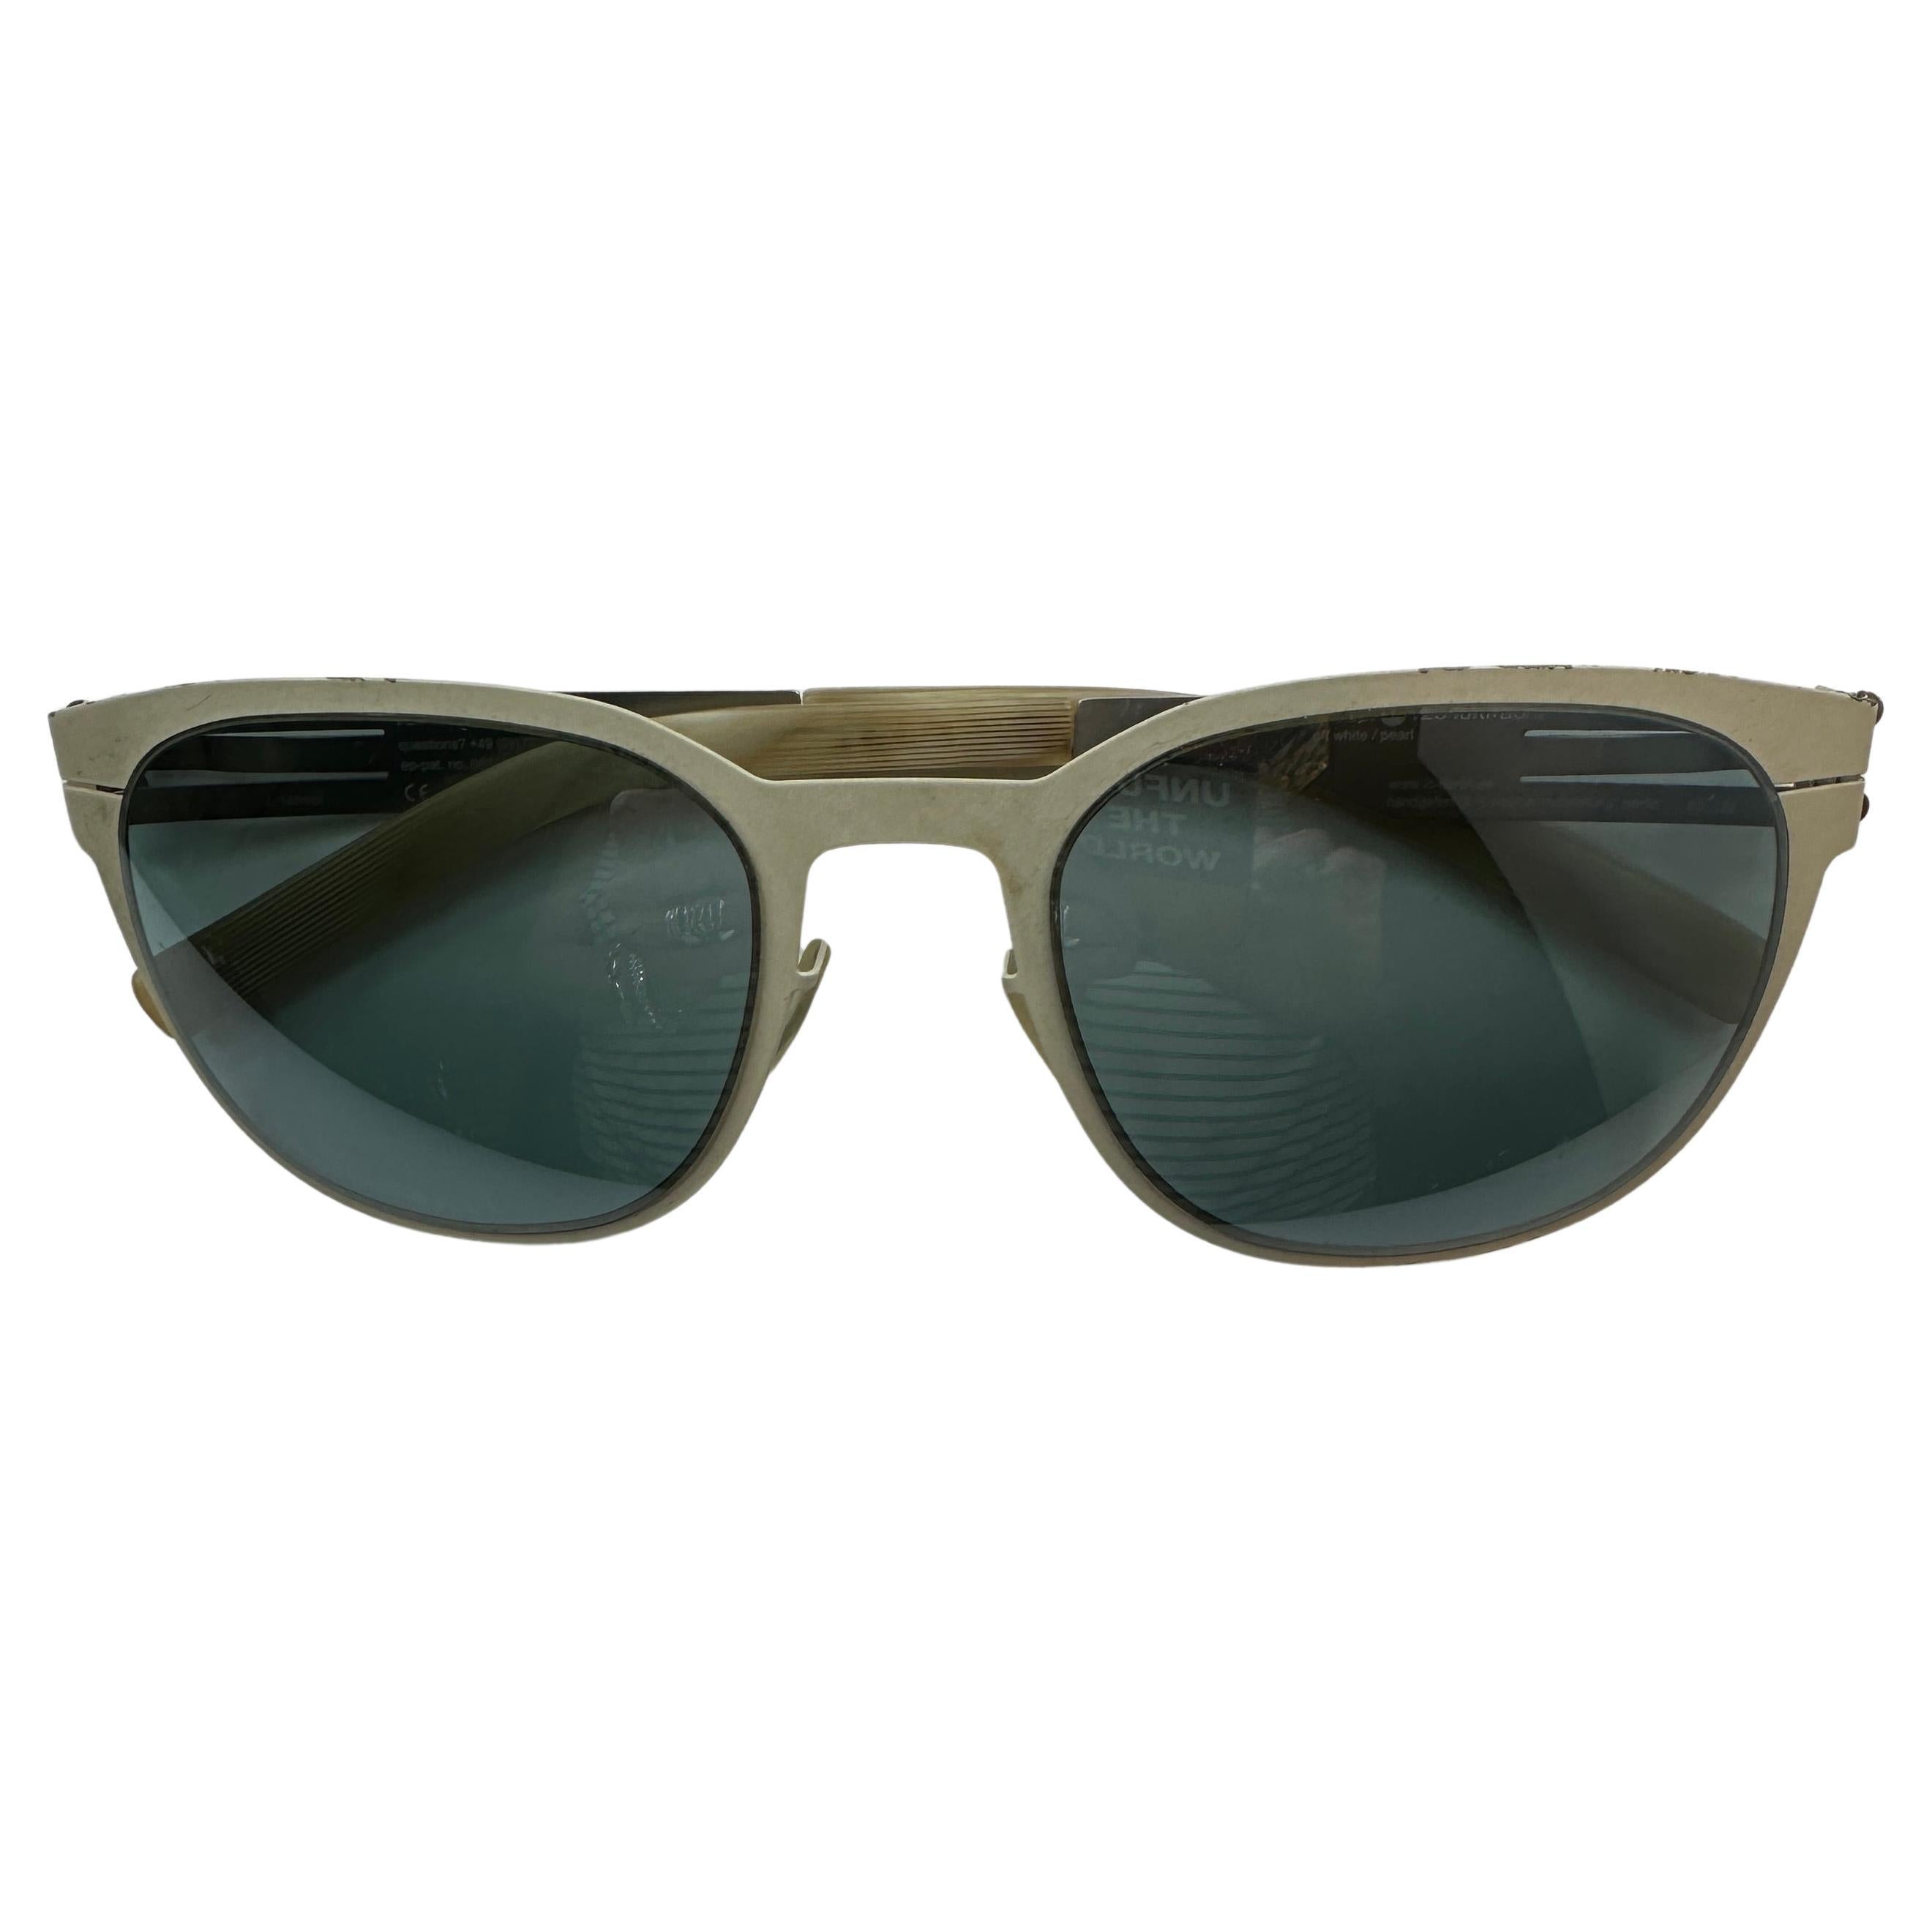 Ic! Berlin 'Limited Edition' Cream & Stainless Steel 'Spring Back' Arms Sunglass For Sale